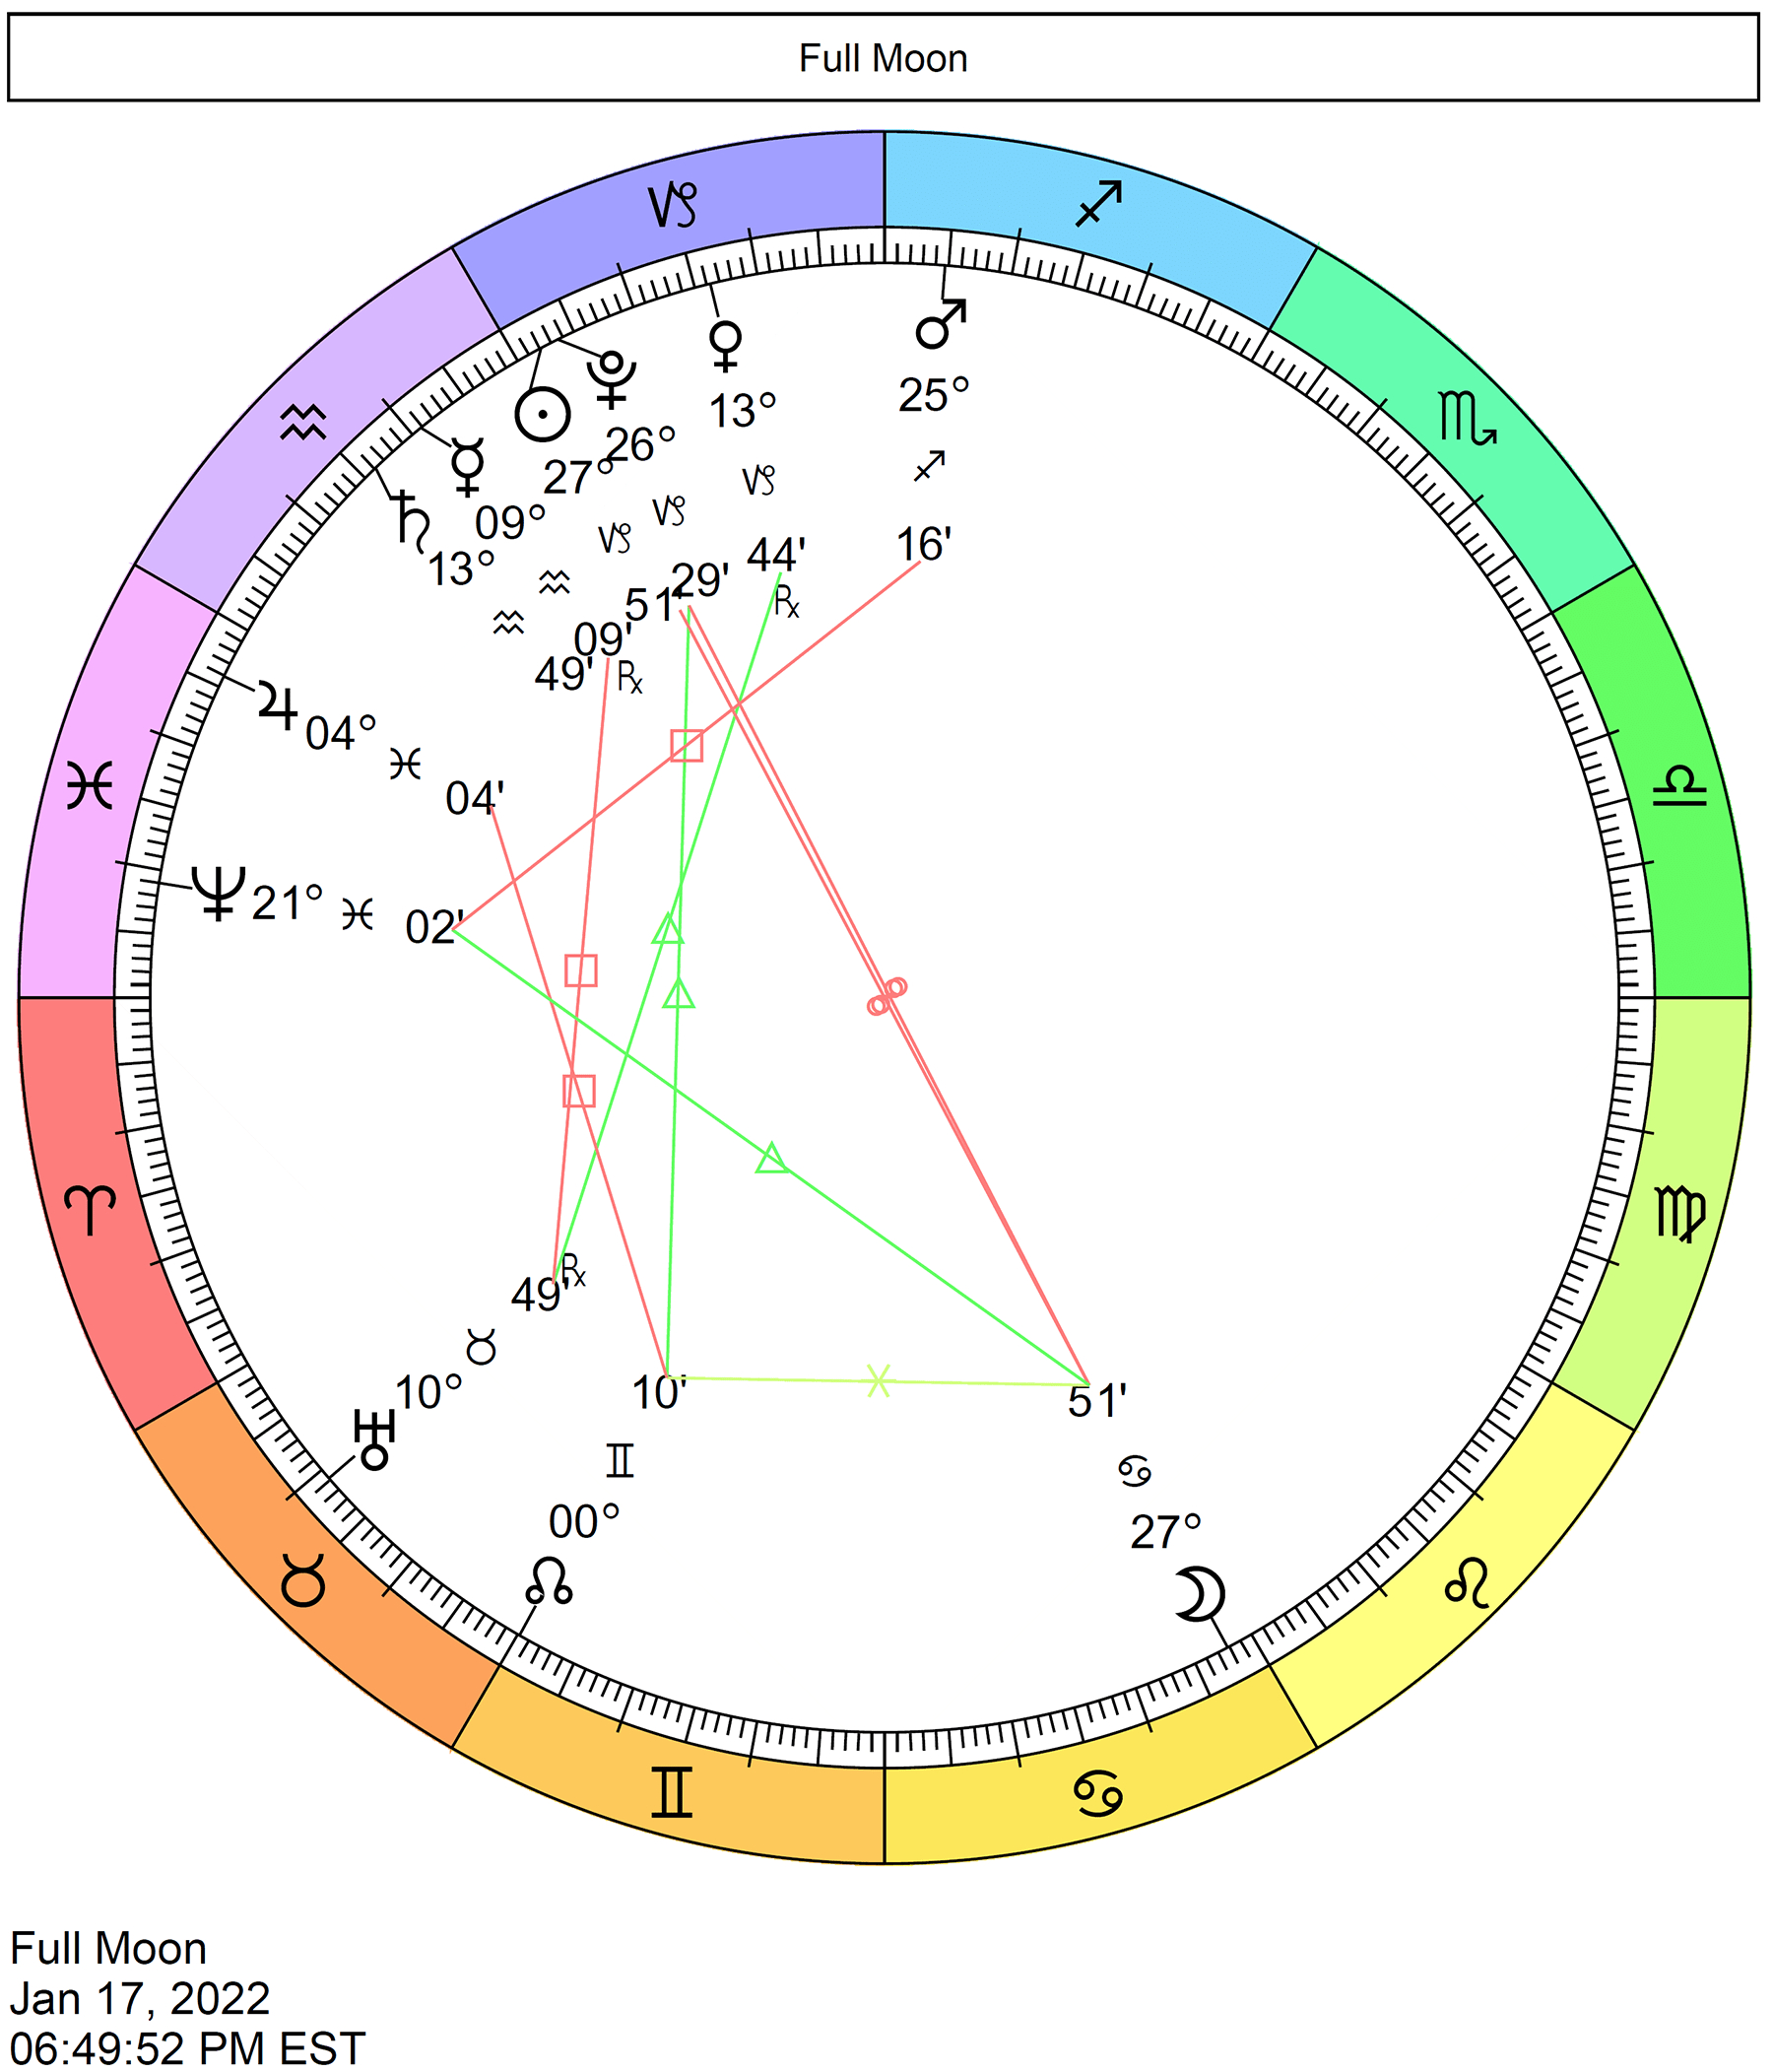 Full Moon In Cancer On January 17, 2022 | Cafe Astrology